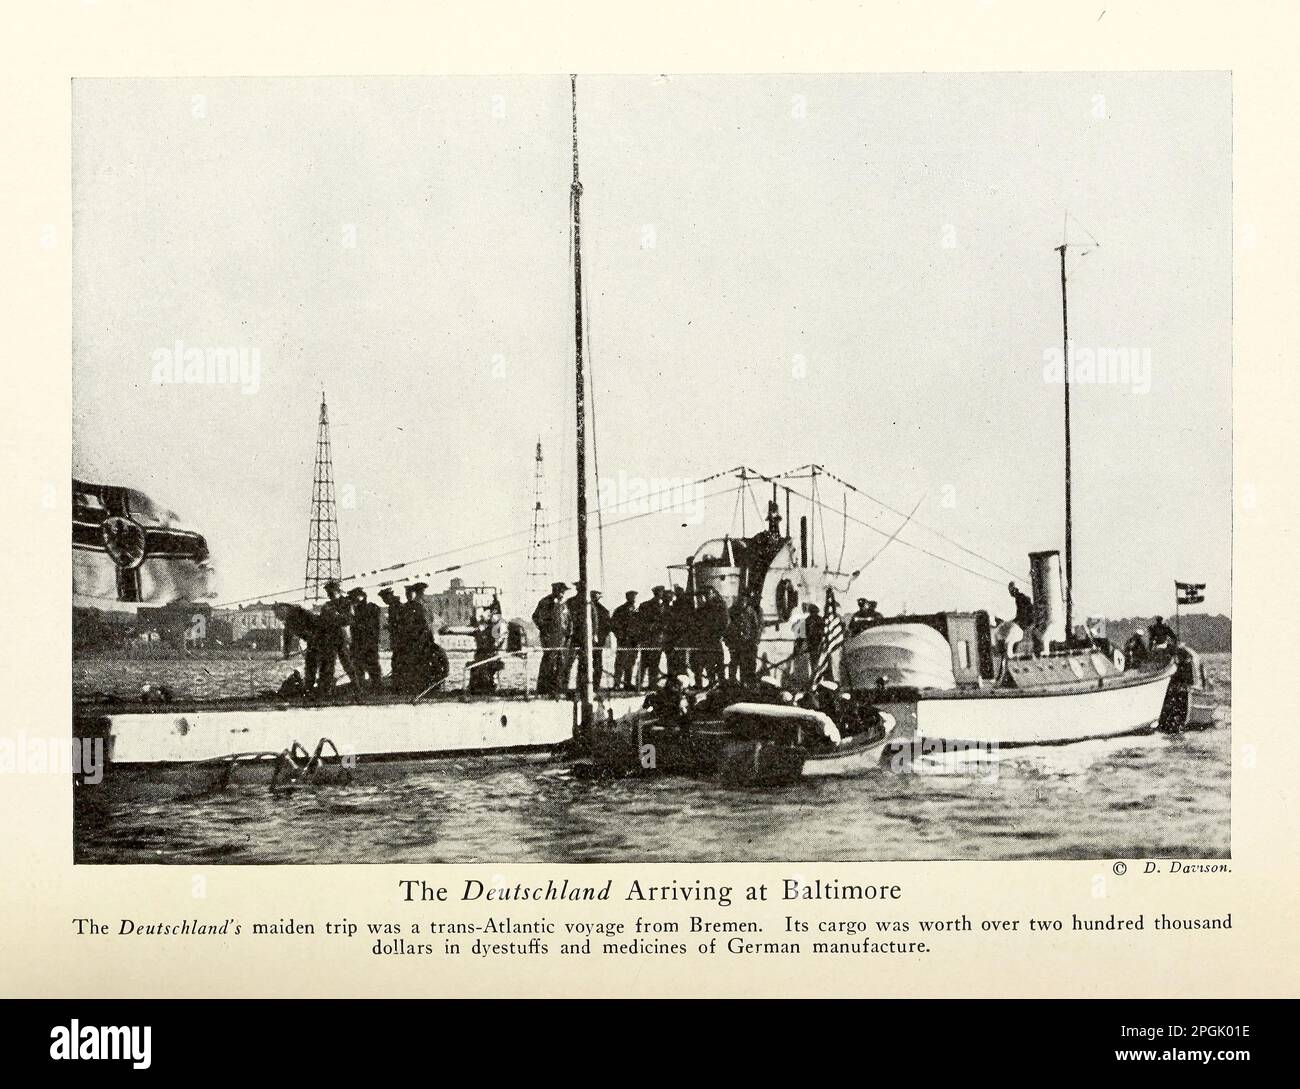 The Deutschland Arriving at Baltimore from the book ' Deeds of heroism and bravery : the book of heroes and personal daring ' by Elwyn Alfred Barron and Rupert Hughes,  Publication Date 1920 Publisher New York : Harper & Brothers Publishers Stock Photo